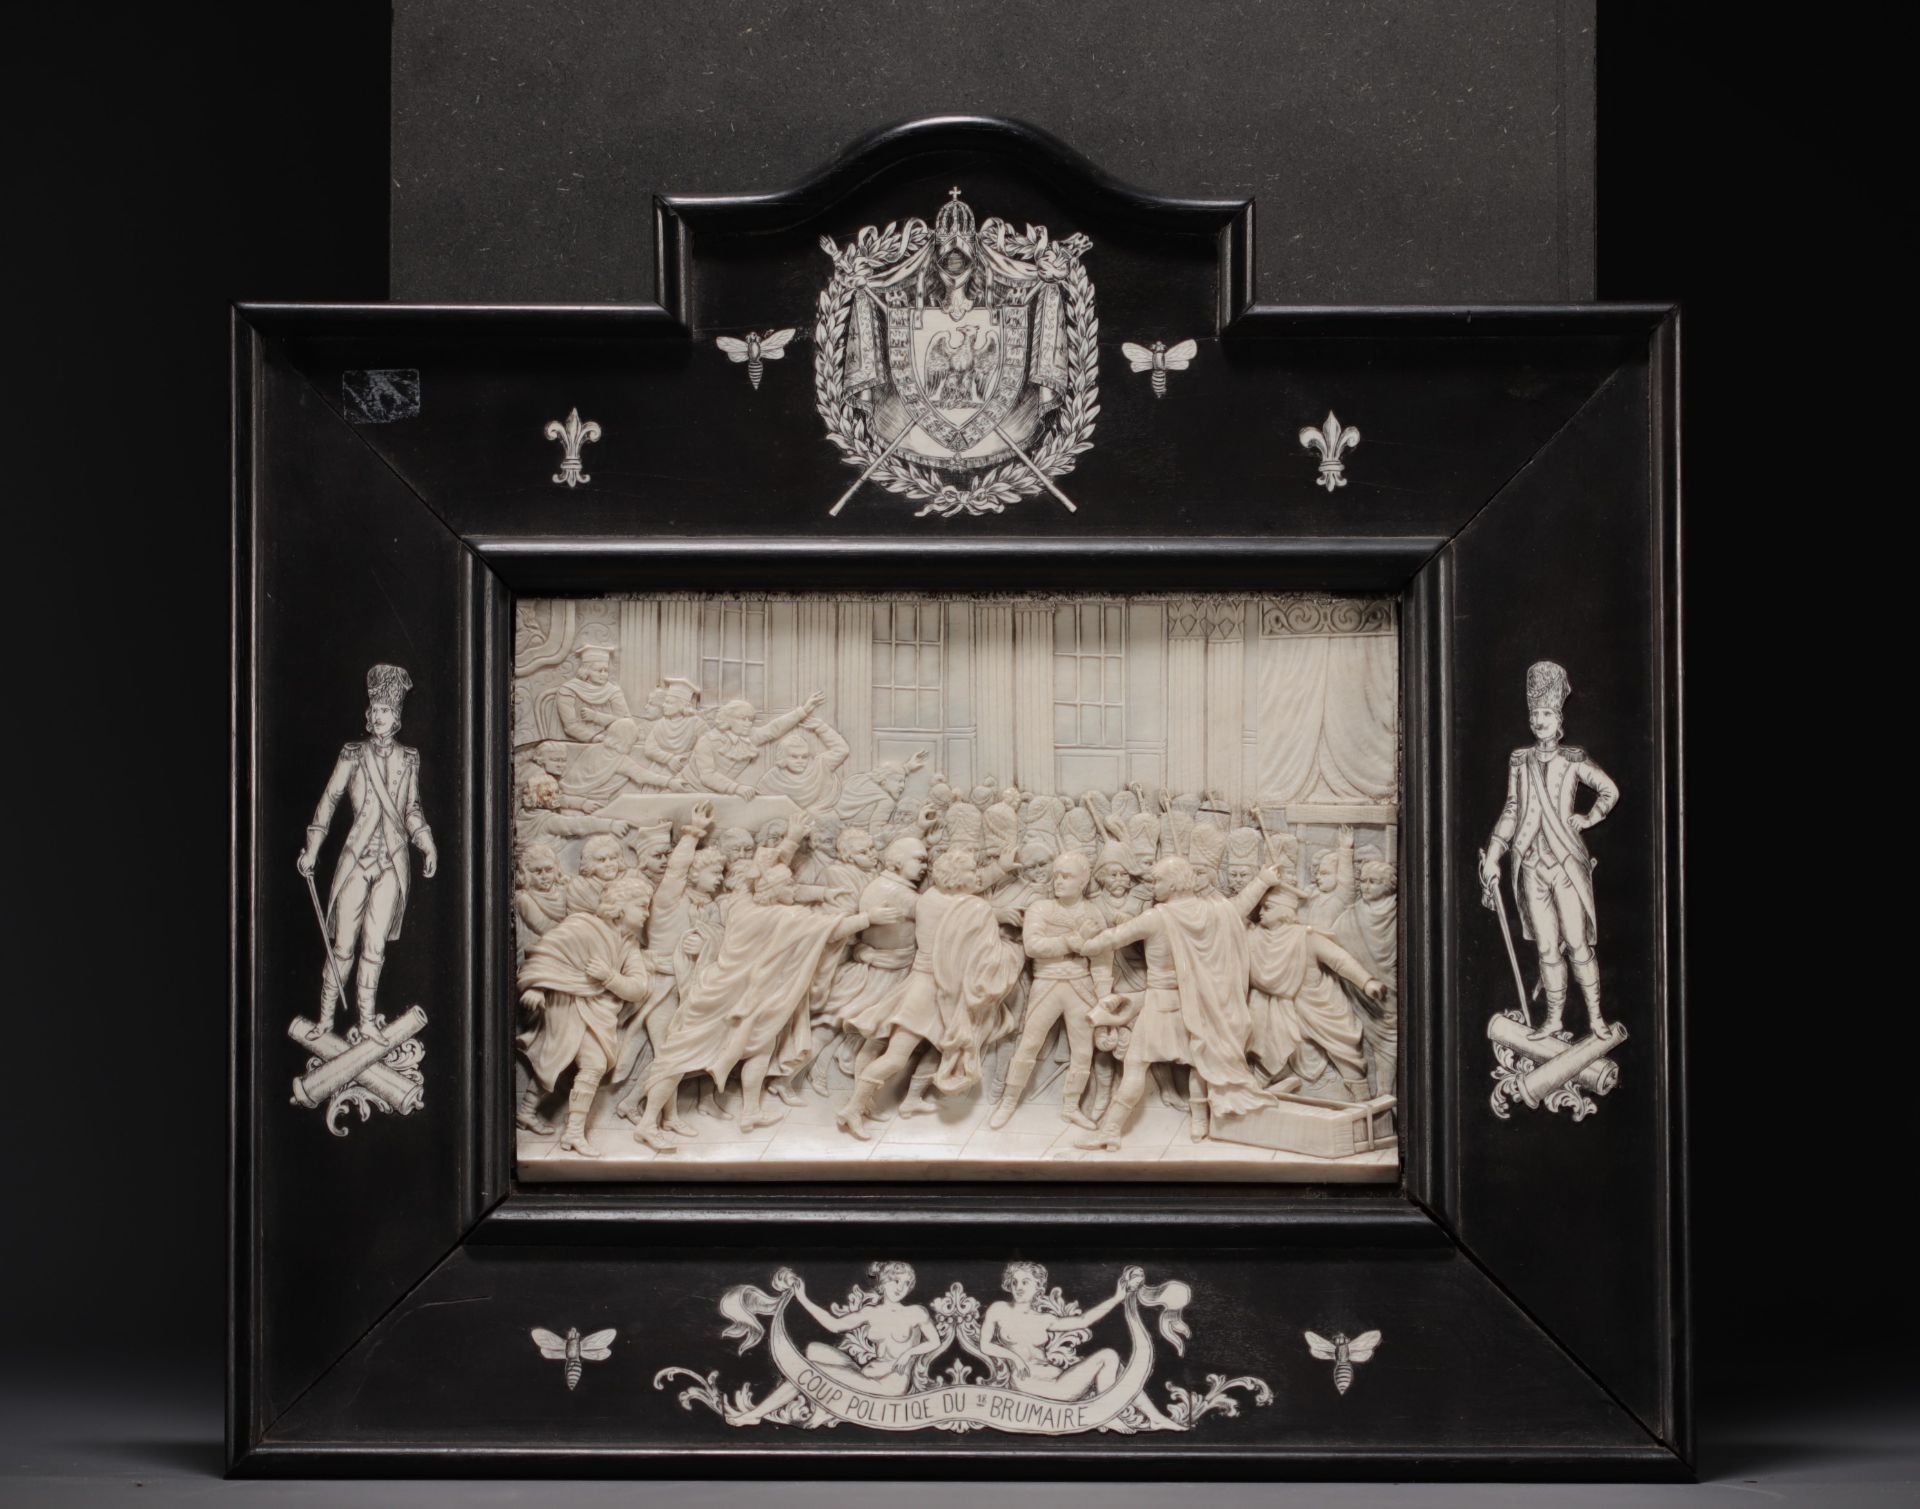 "Coup politique du 18 Brumaire" Low relief painting in carved ivory, 19th century.